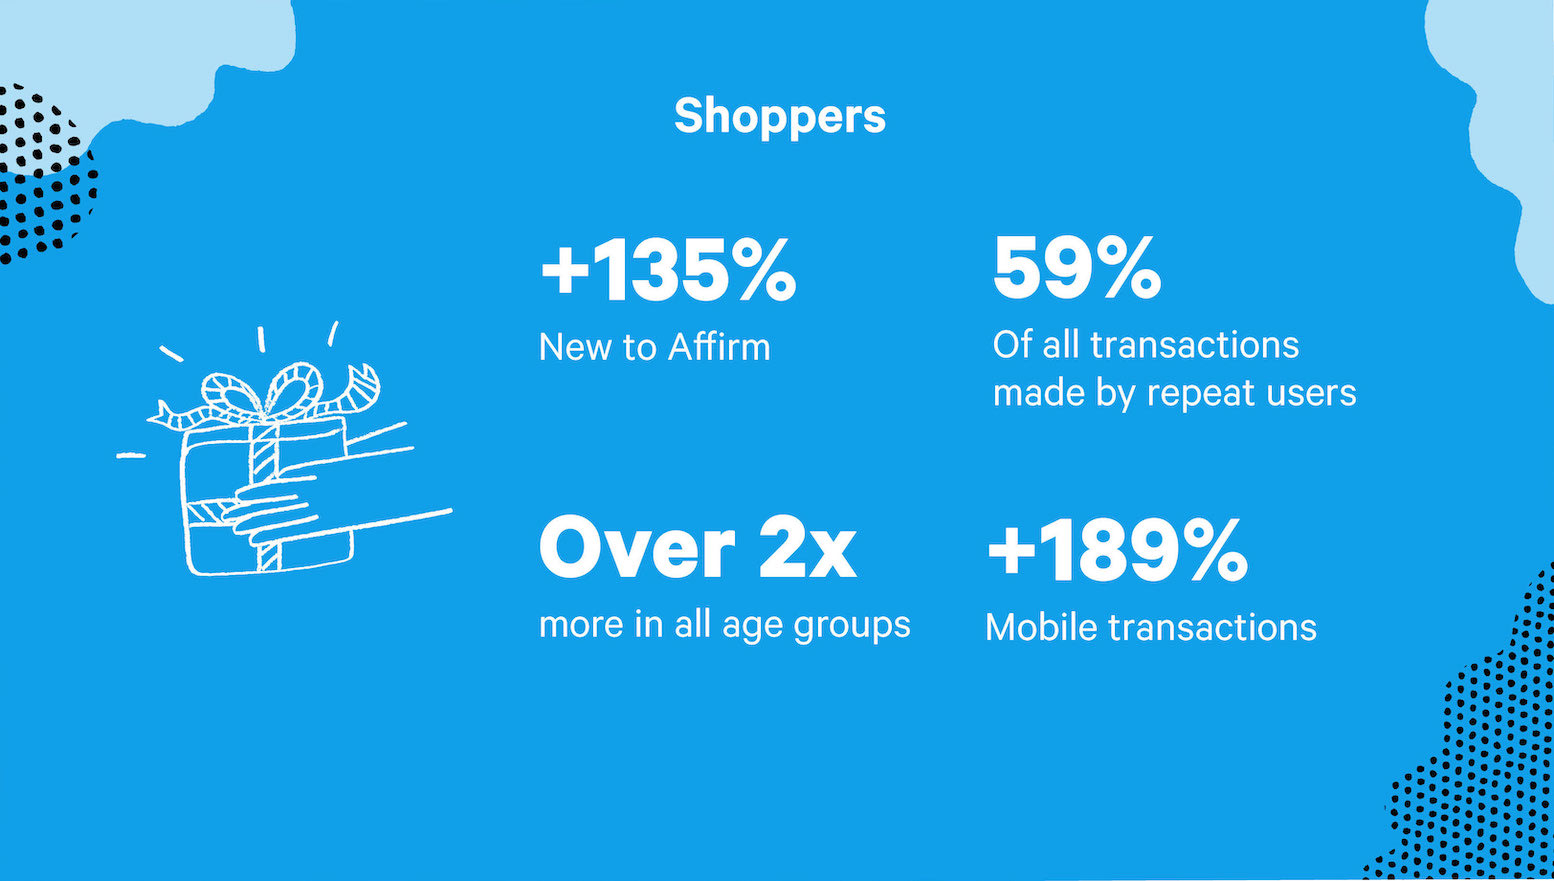 Infographic showing increase in holiday shopper activity with Affirm